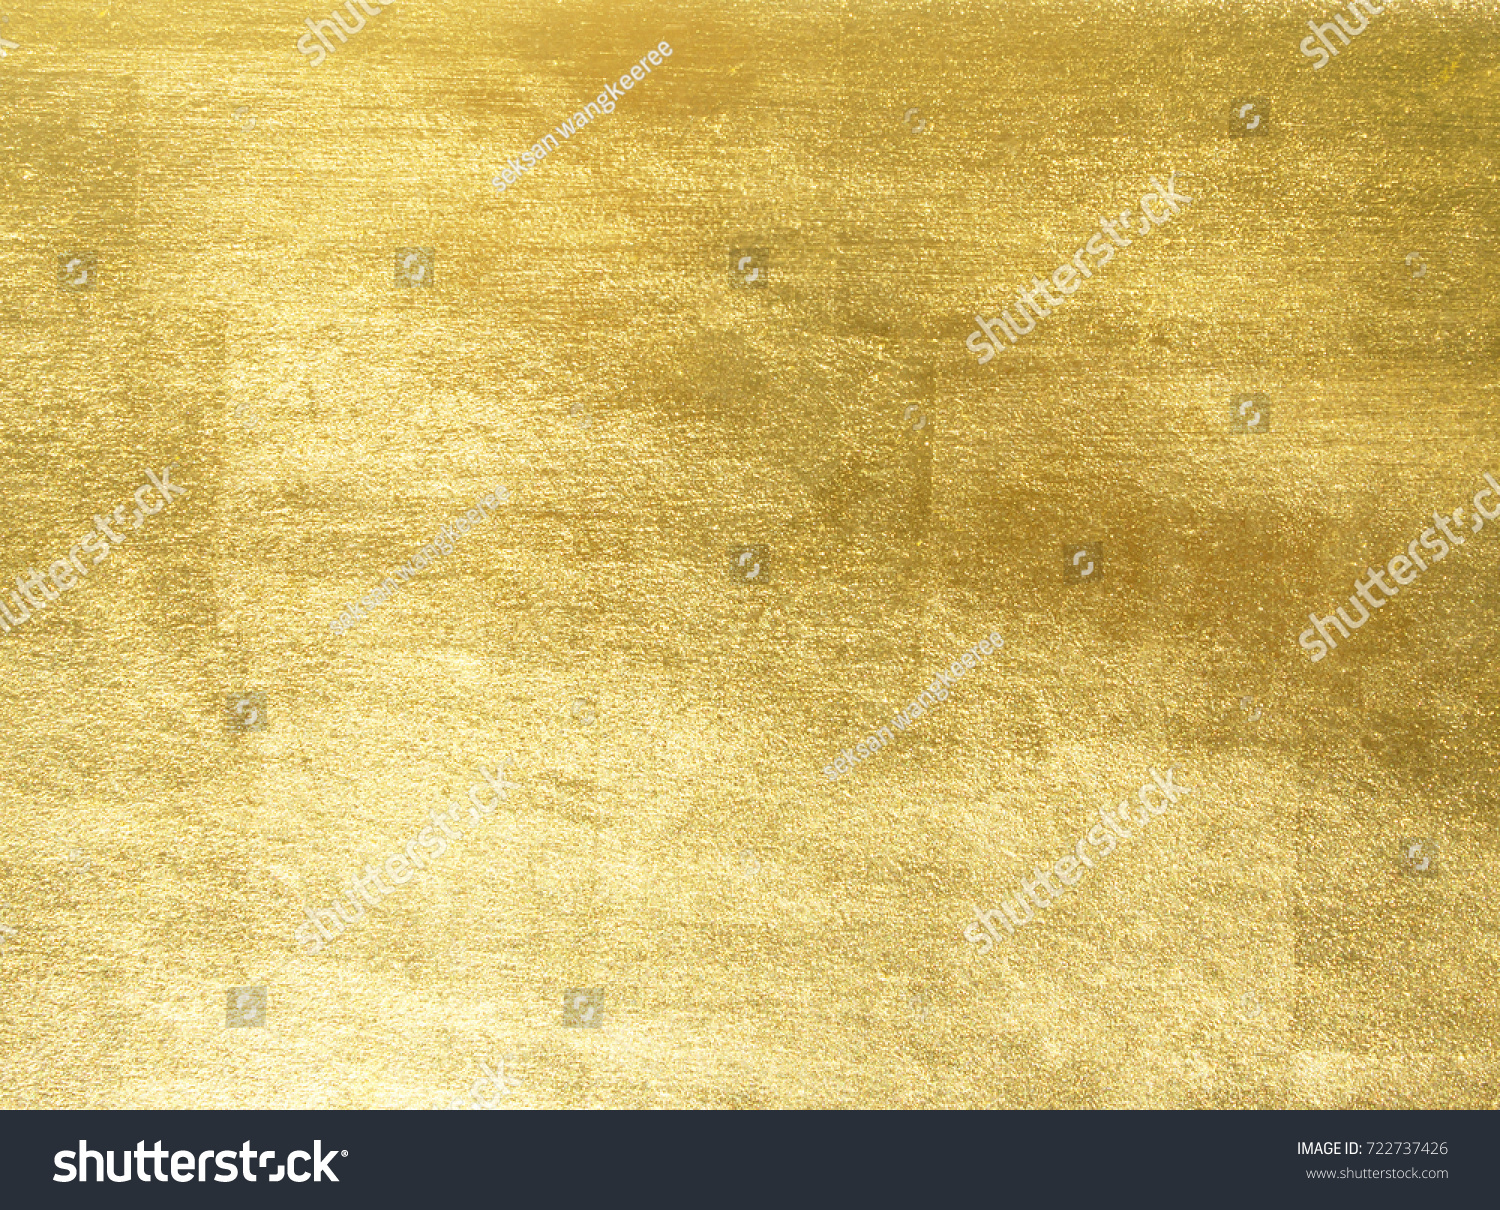 Shiny yellow leaf gold foil texture background #722737426